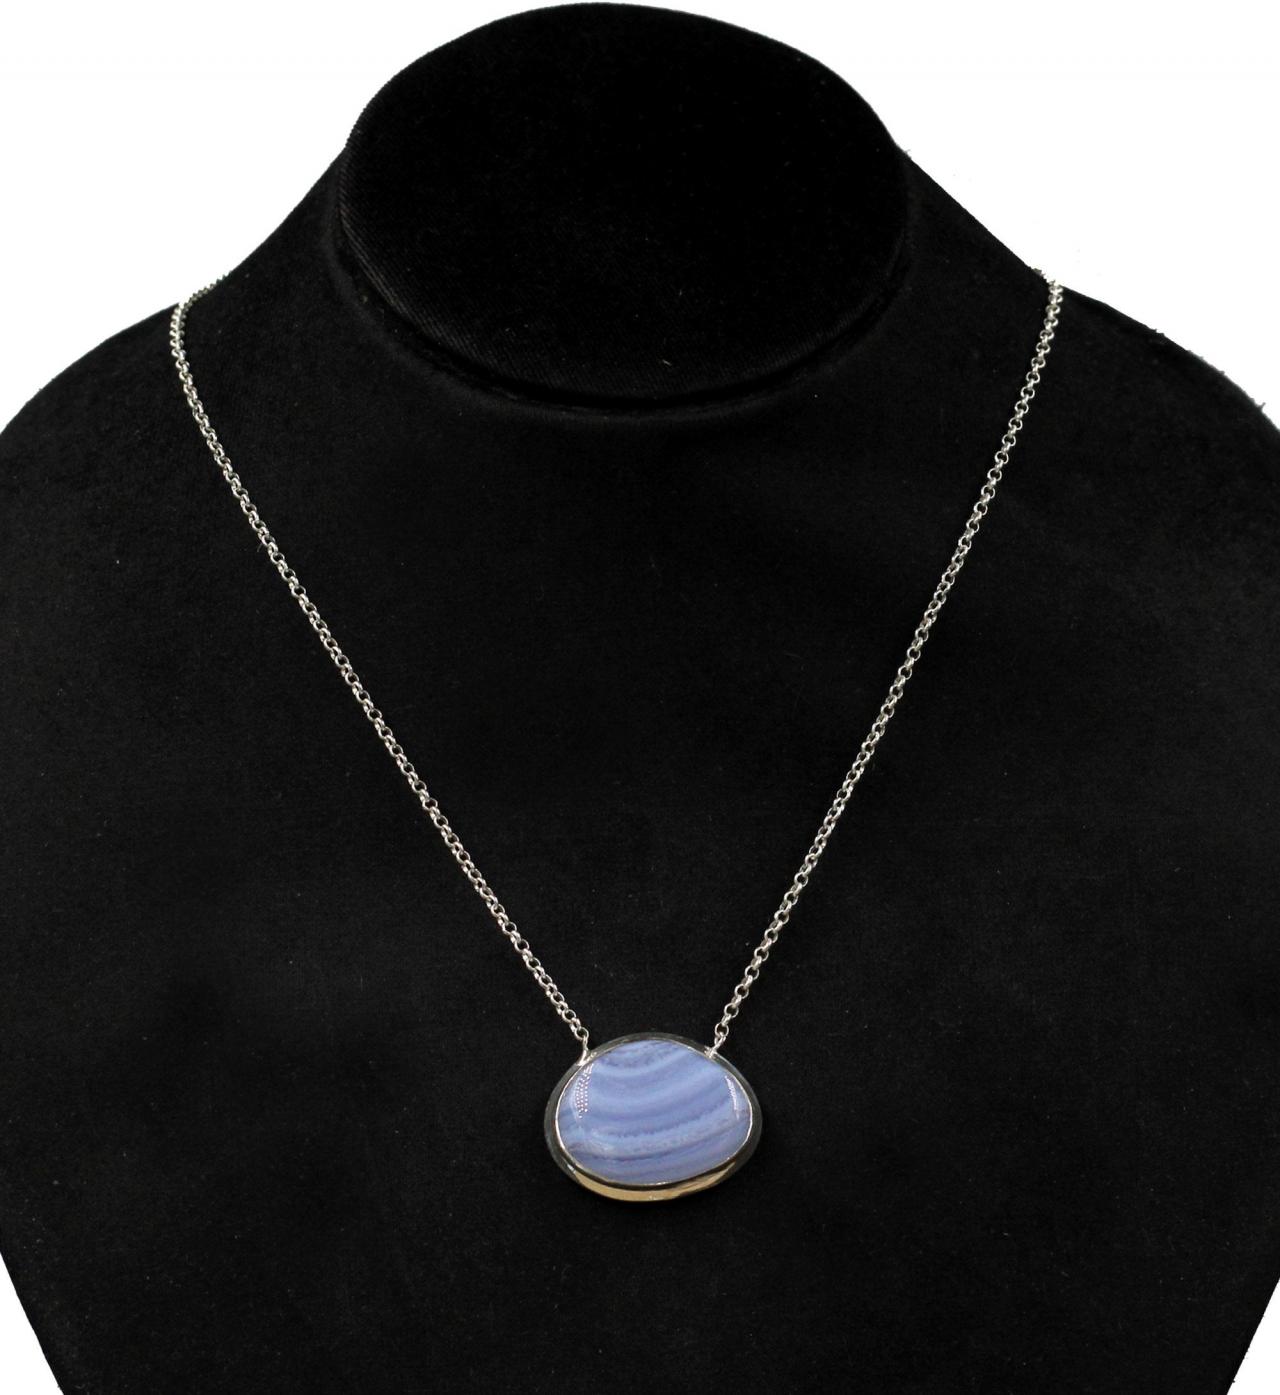 Gorgeous Blue Lace Agate Necklace,solid 925 Sterling Silver Jewelry,anniversary Gift,anniversary Gift Chain Pendant Necklace,pendant For Mom